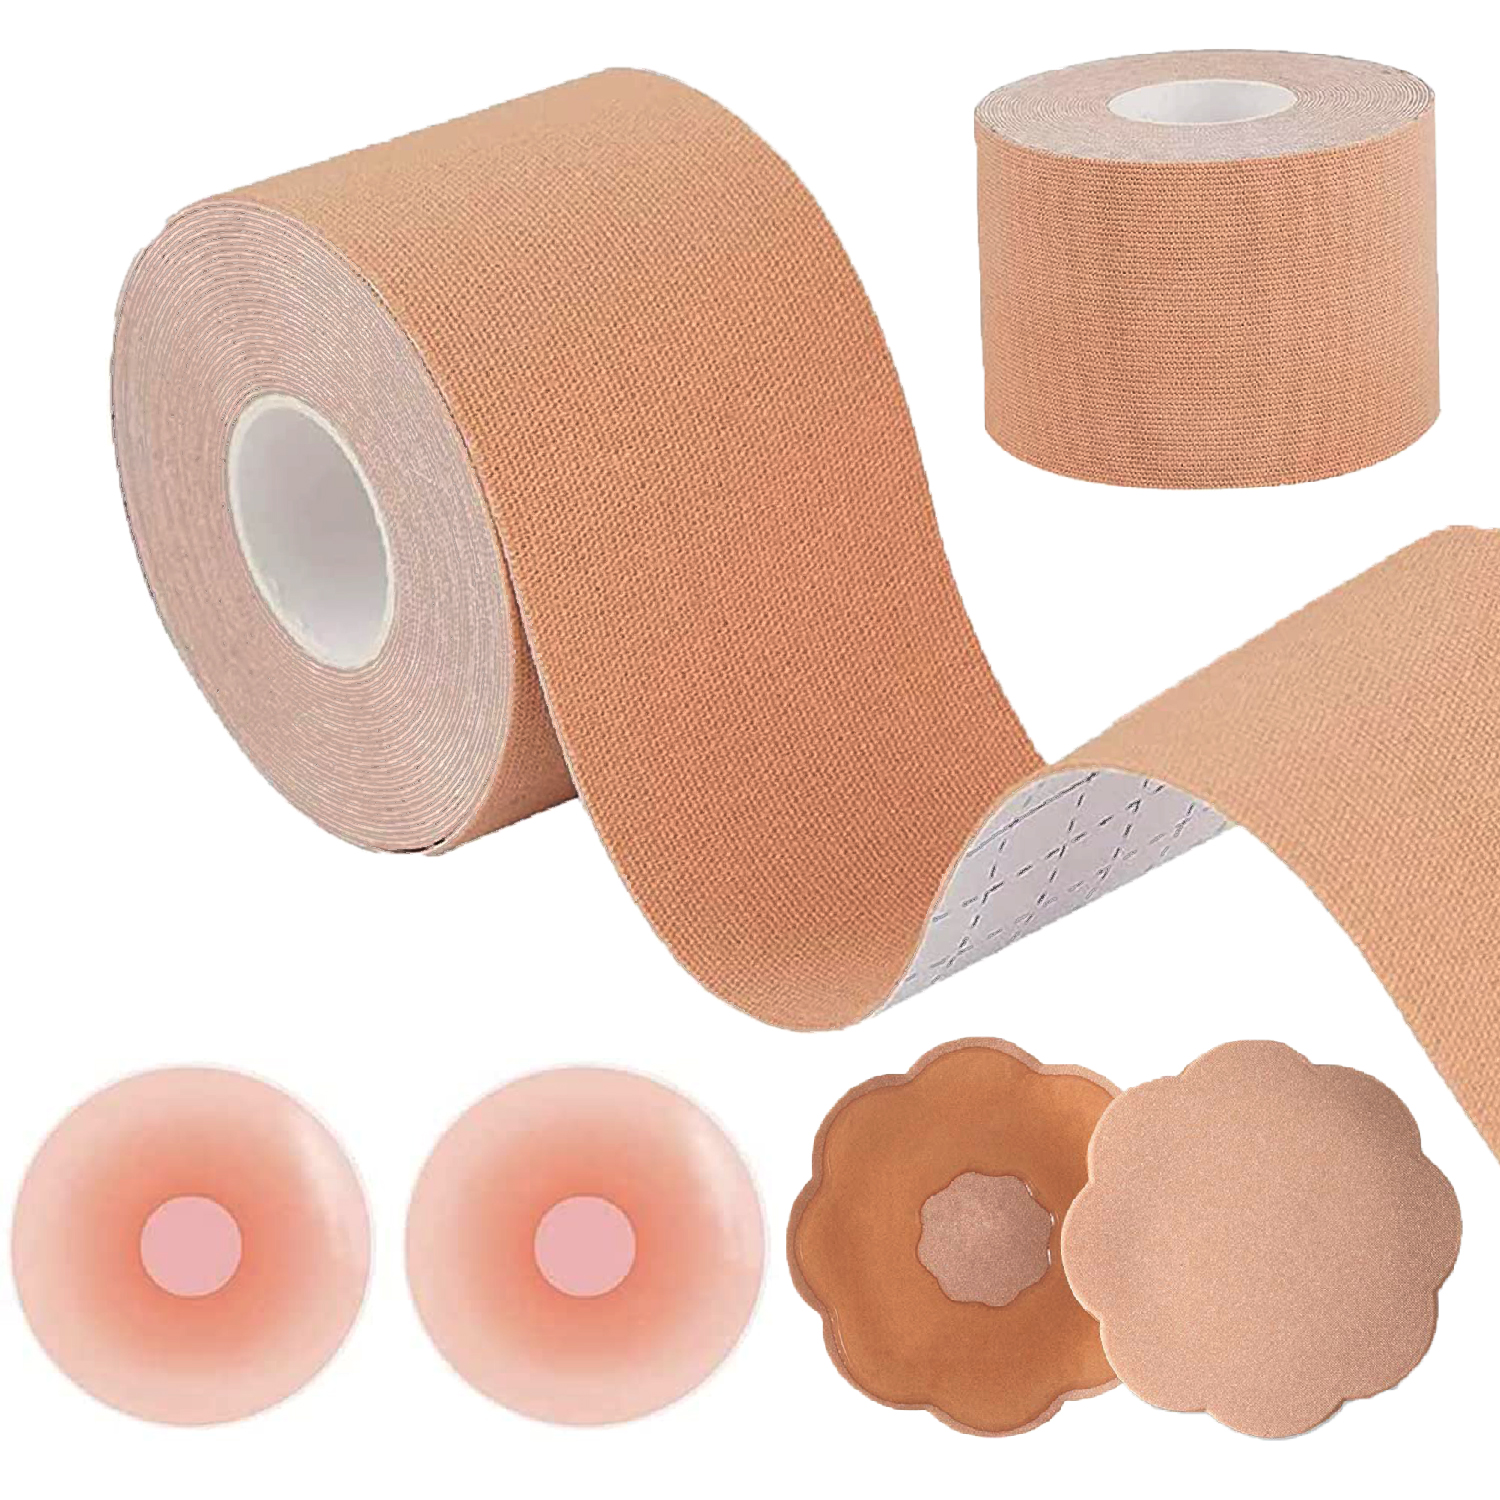 Boob Tape, Breast Lift Tape and Nipple Covers, Push up Tape and